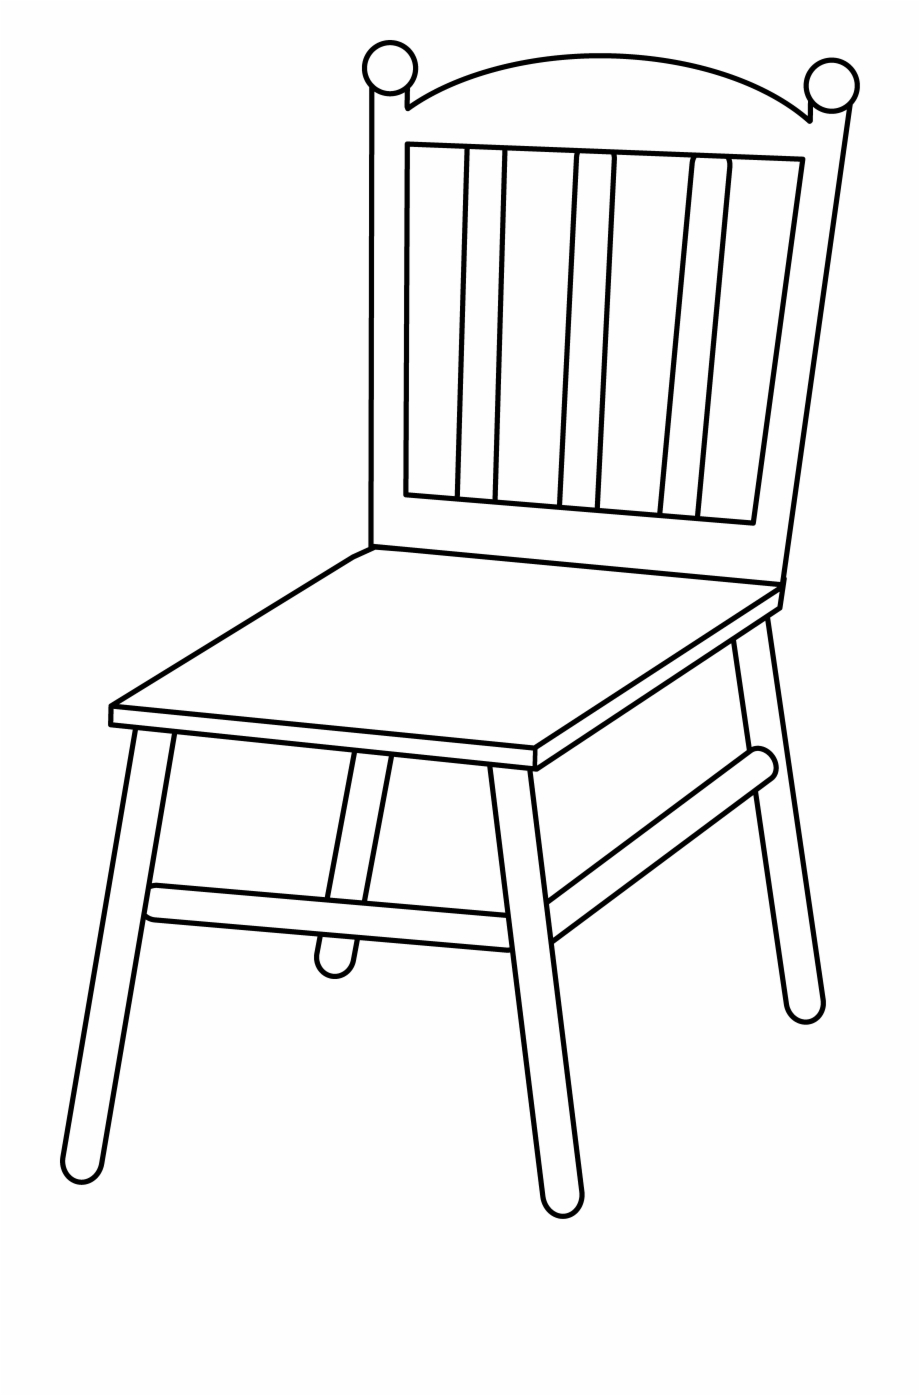 chair clipart clear background